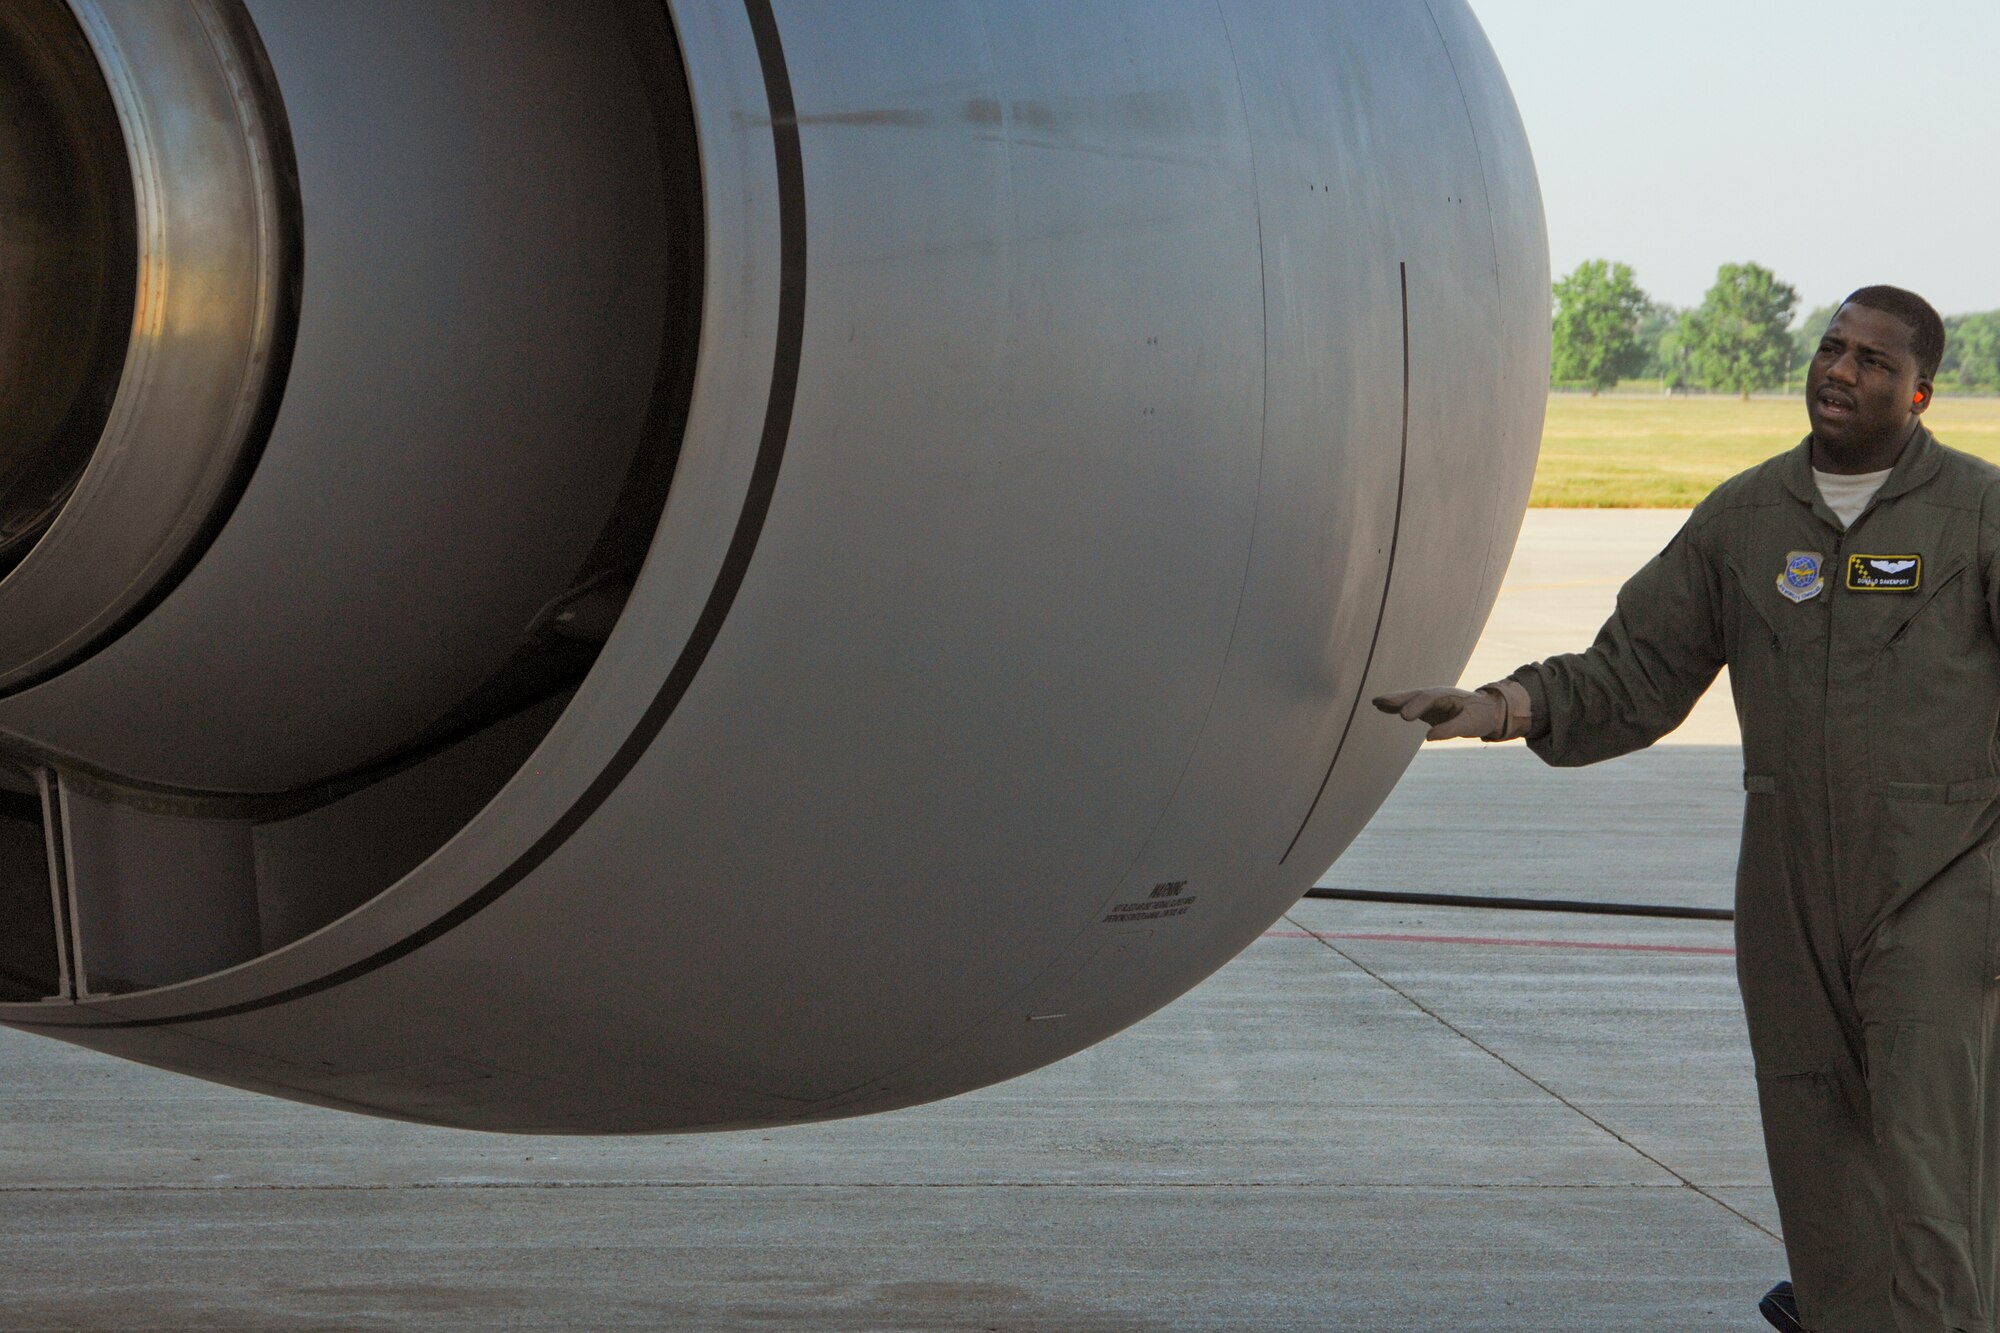 Capt. Don Davenport performs a pre-flight inspection of a KC-135 Stratotanker at Selfridge Air National Guard Base, Mich., July 21, 2011. Davenport is a pilot with the 171st Air Refueling Squadron at Selfridge. (USAF photo by John S. Swanson)